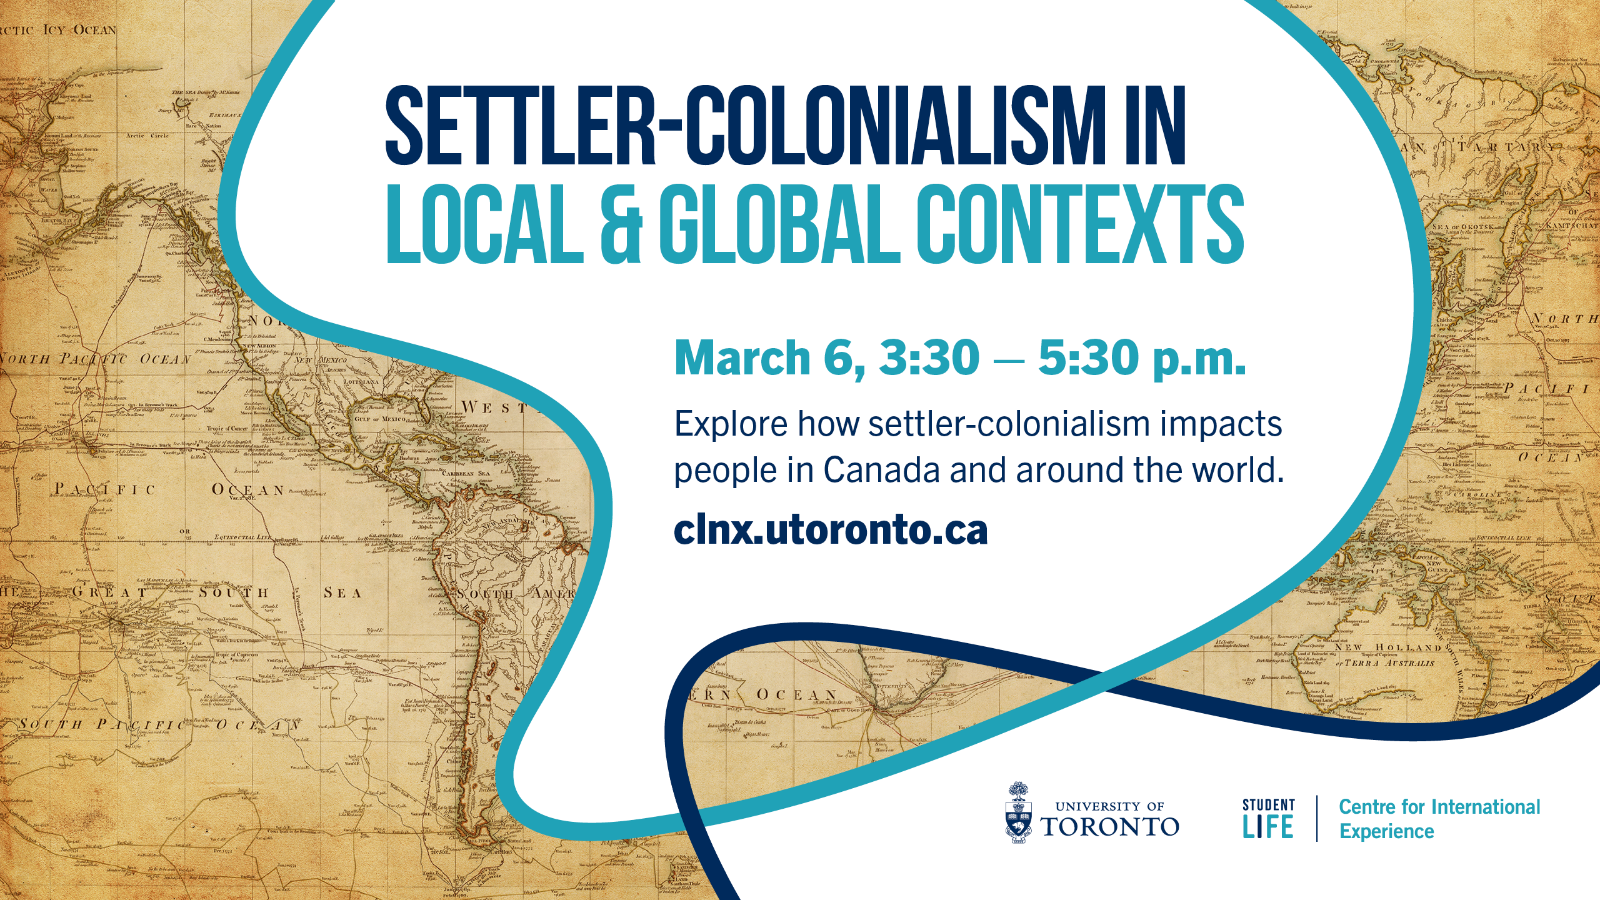 A photo of the world map, with text "Settler-colonialism in local & global contexts; March 6, 3:30 - 5:30 p.m. Explore how settler-colonialism impacts people in Canada and around the world. clnx.utoronto.ca."